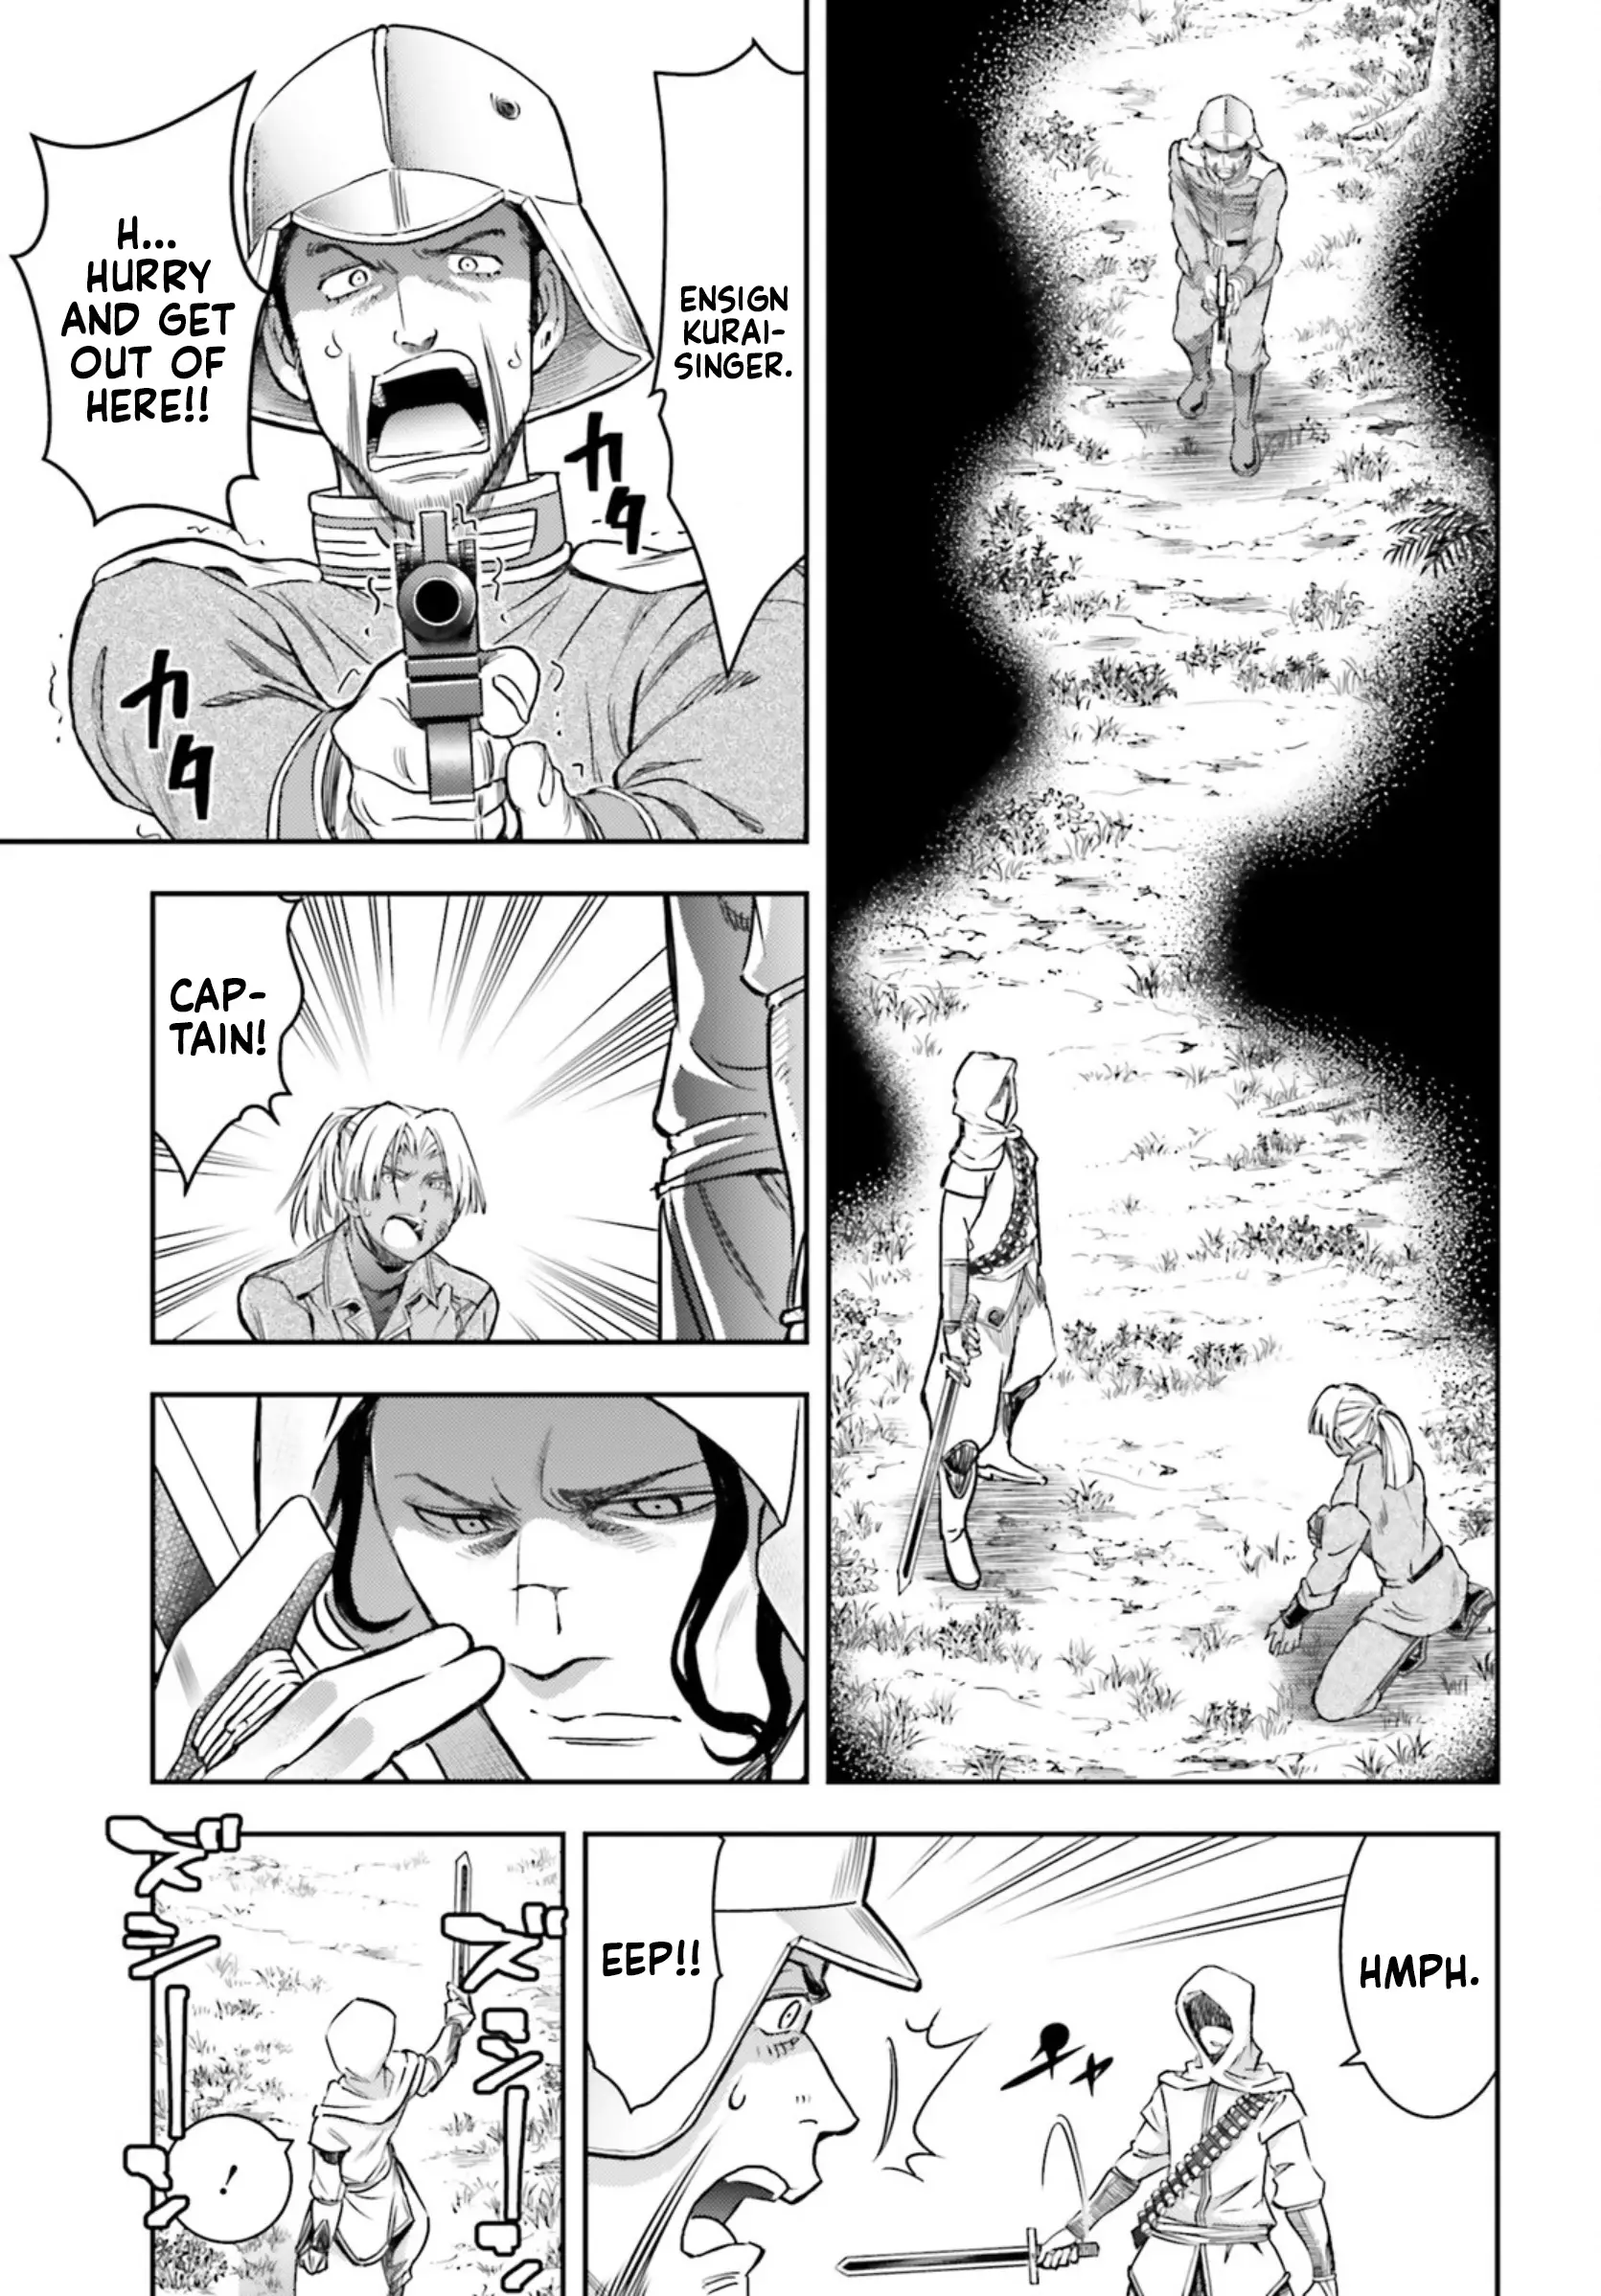 Mobile Suit Gundam: Red Giant 03Rd Ms Team - 9 page 19-5bfea24a